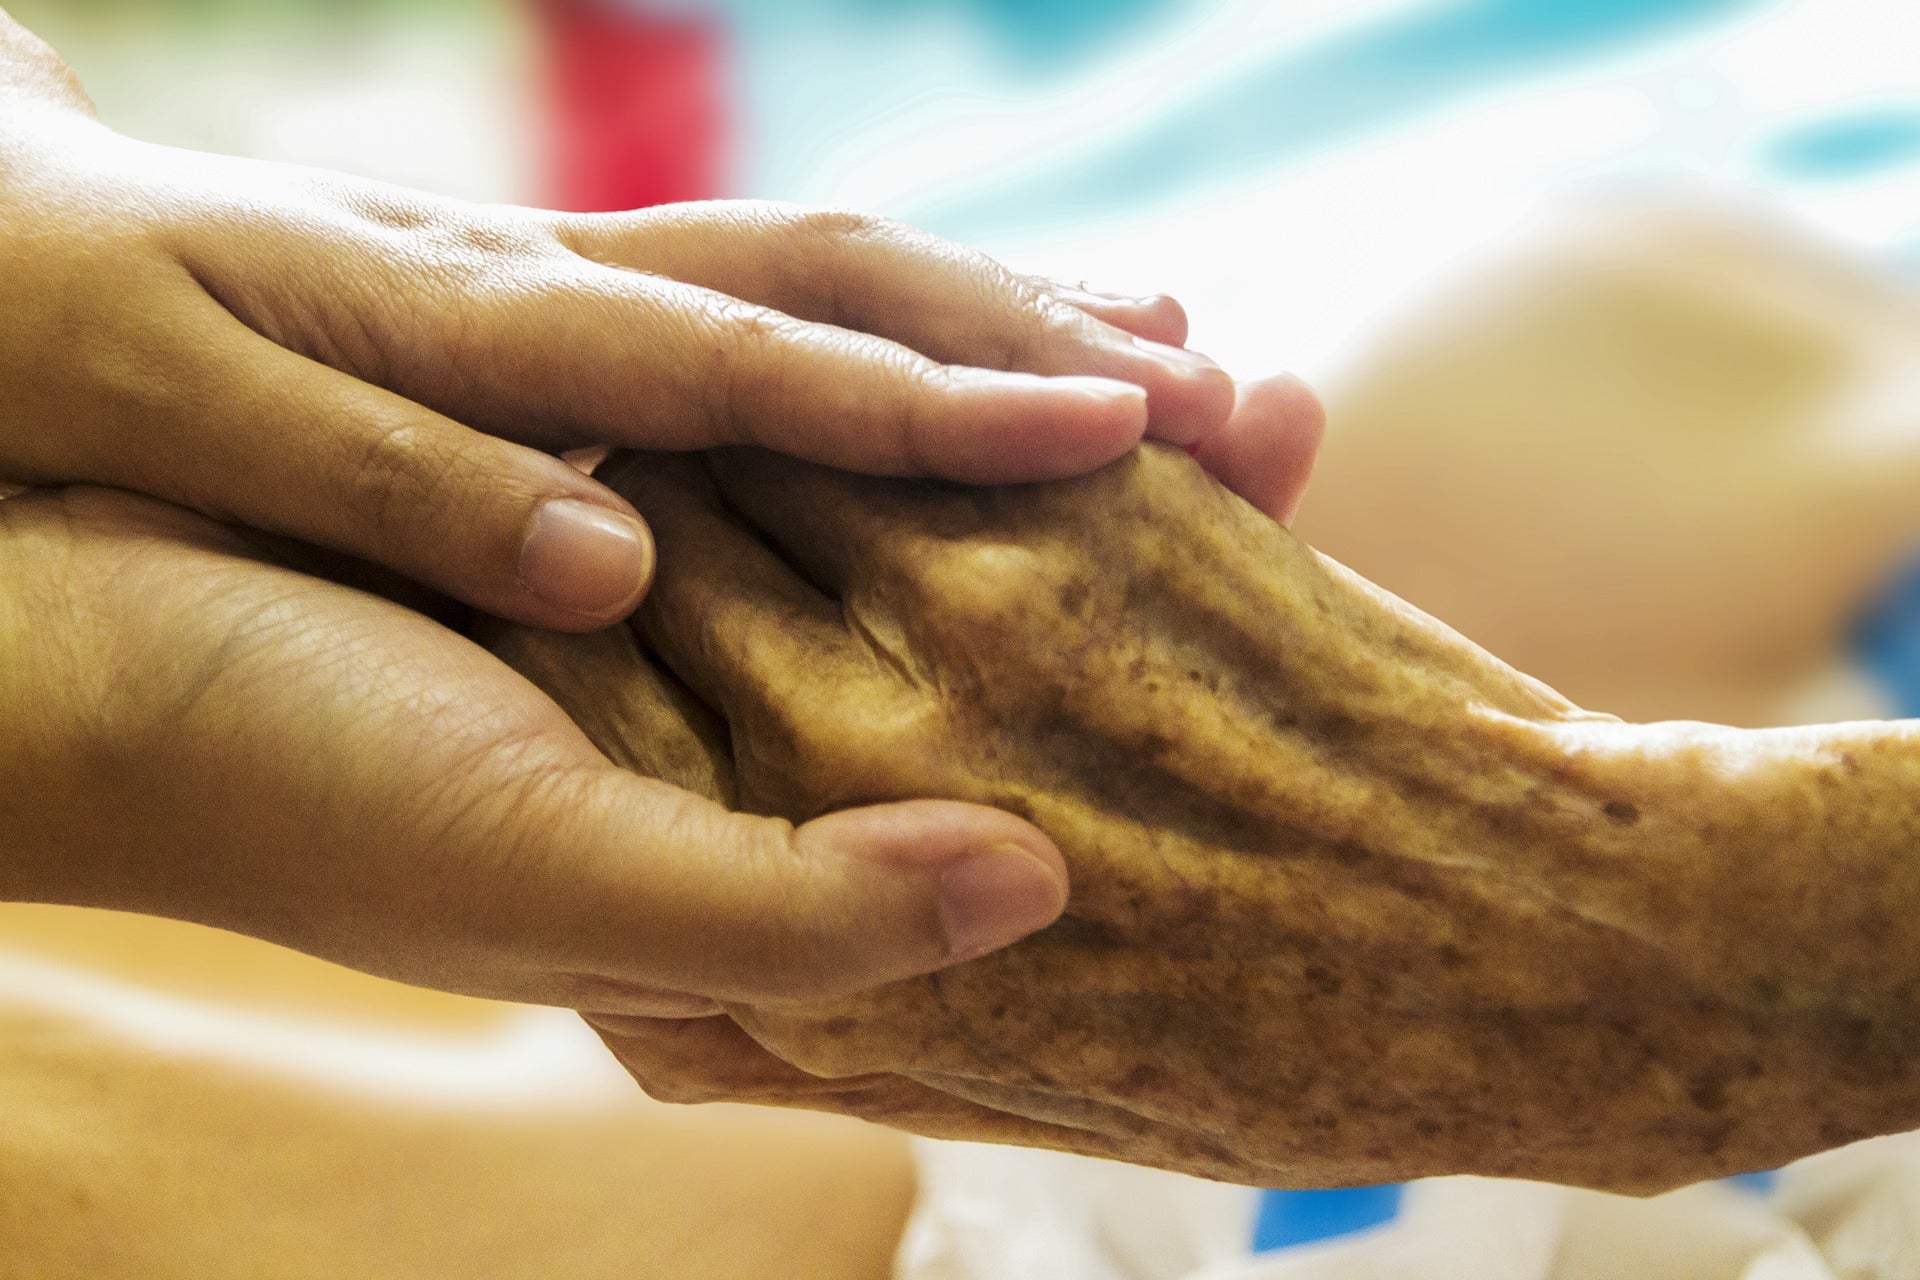 WHY OUR GRANDPARENTS DESERVE A LITTLE PAMPERING: Massage as a Symbol of Elderly Love and Care